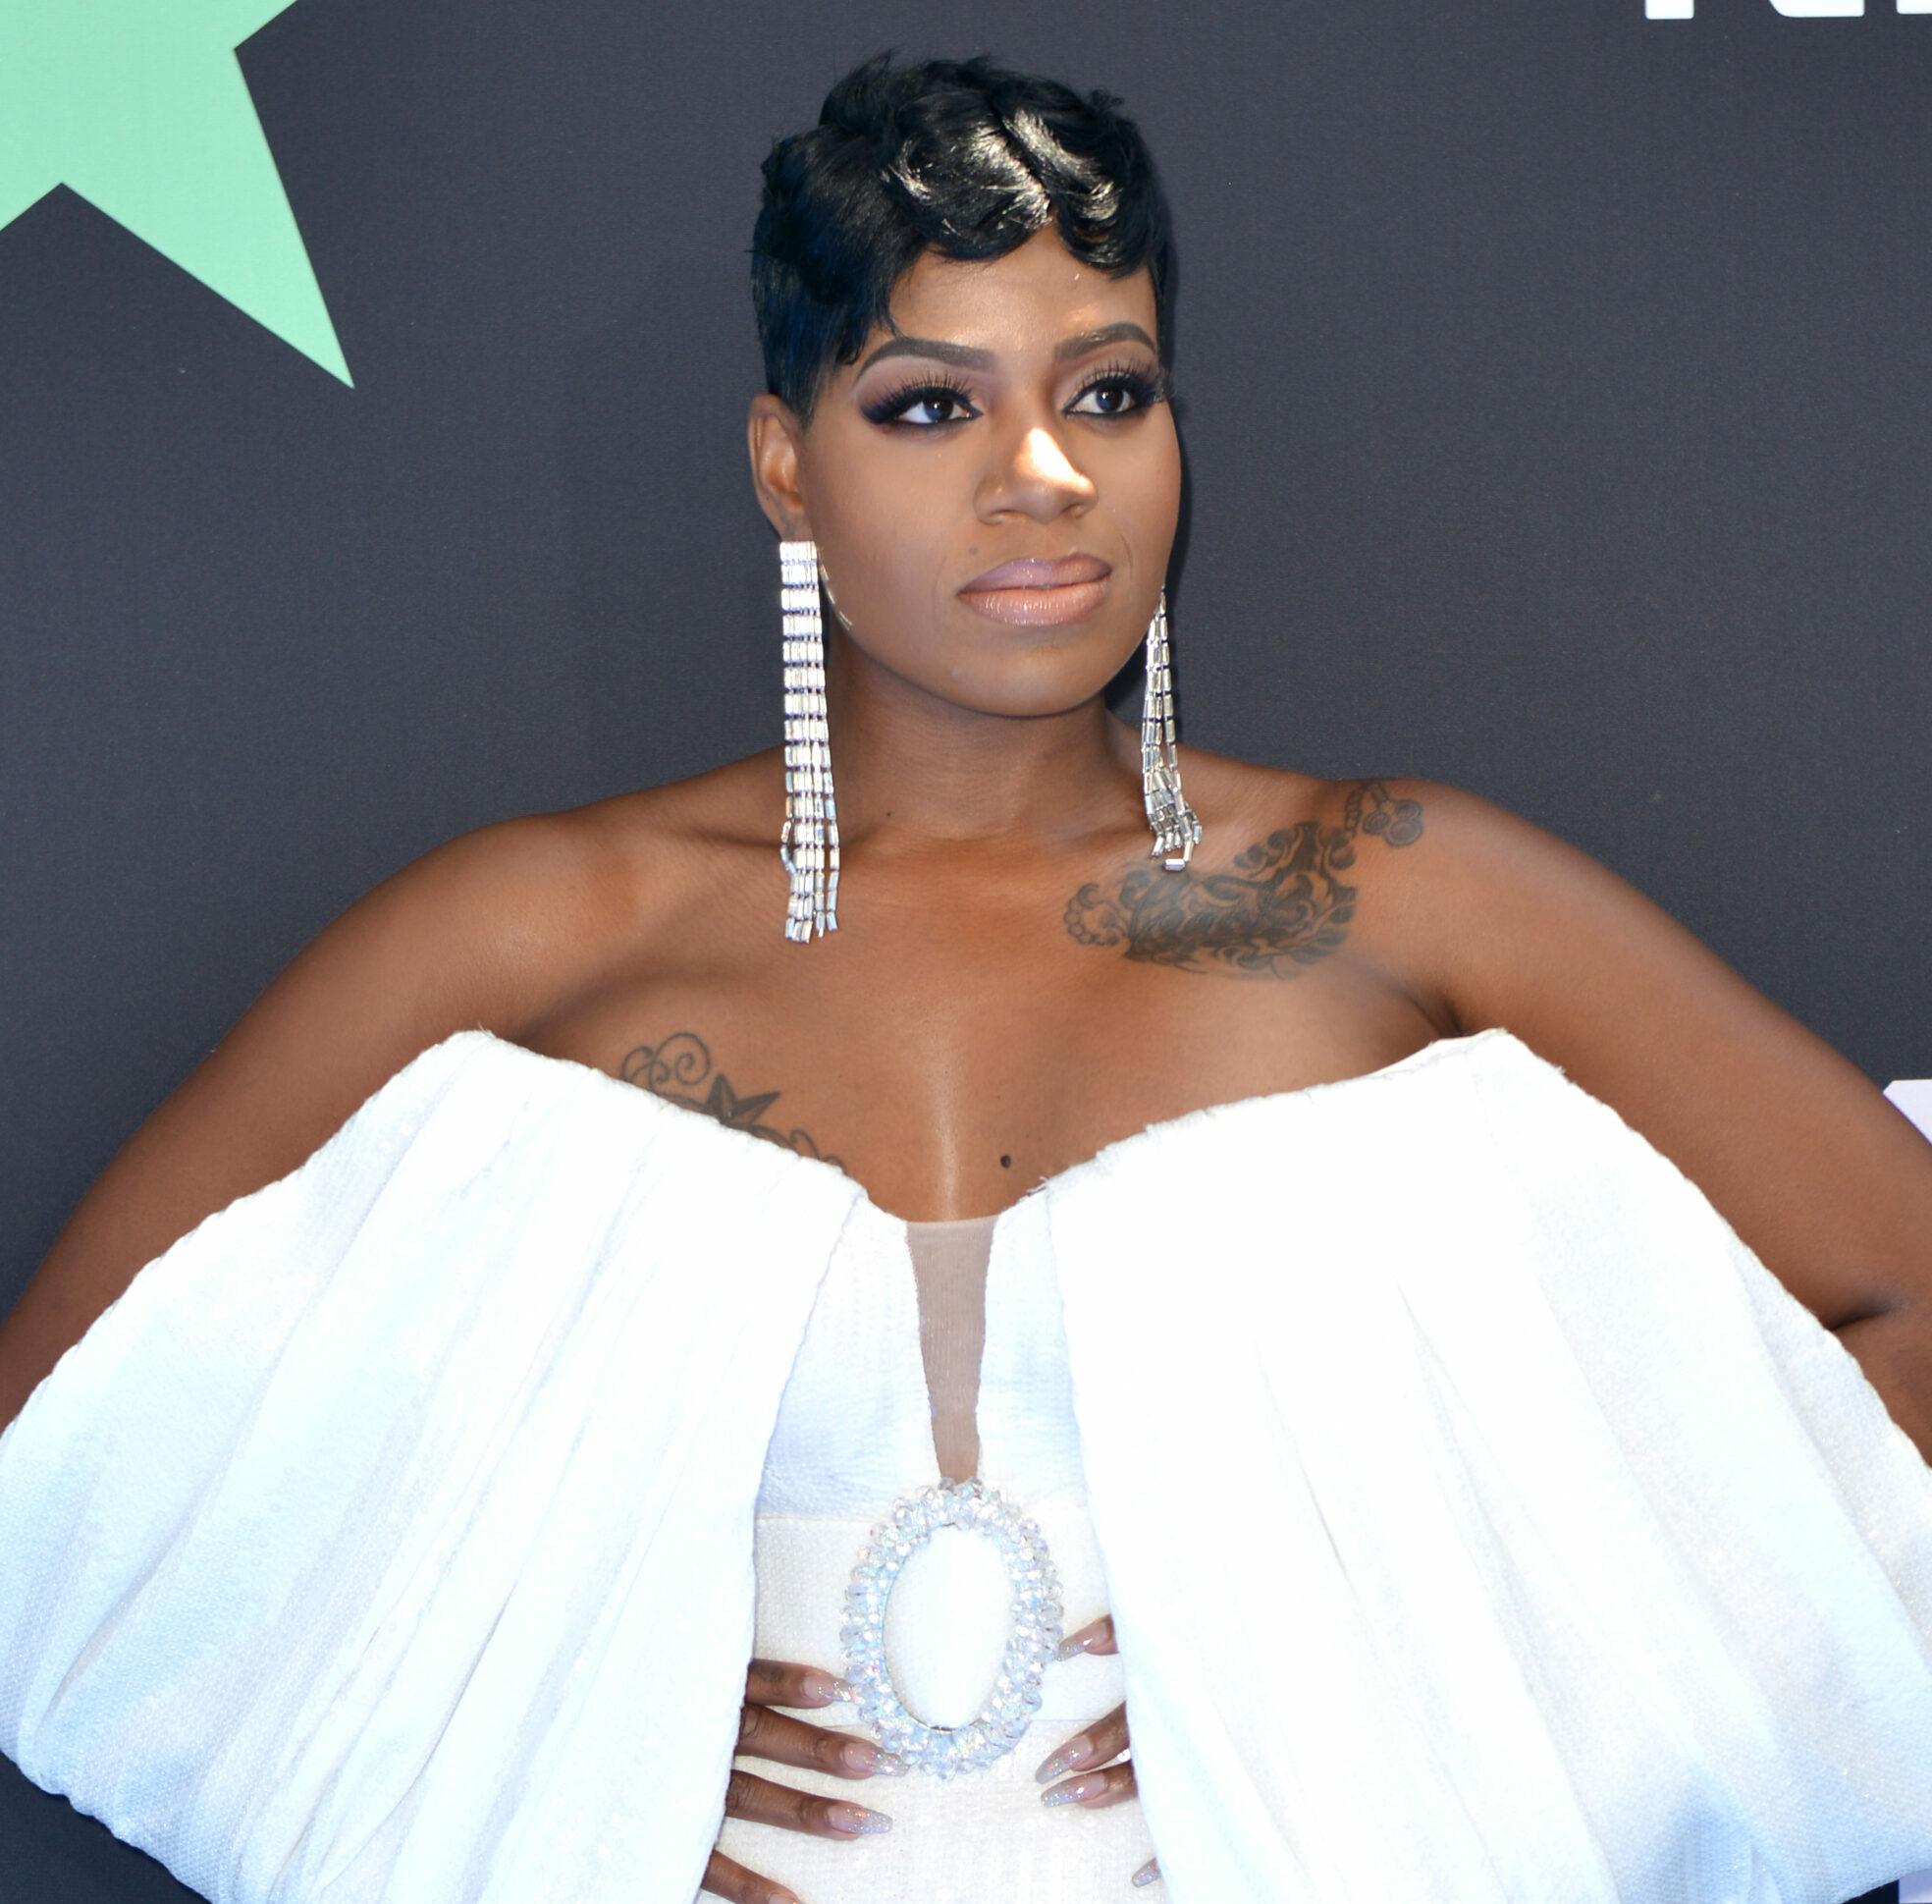 Fantasia Barrino arrives for the 19th annual BET Awards at the Microsoft Theater in Los Angeles on June 23, 2019.